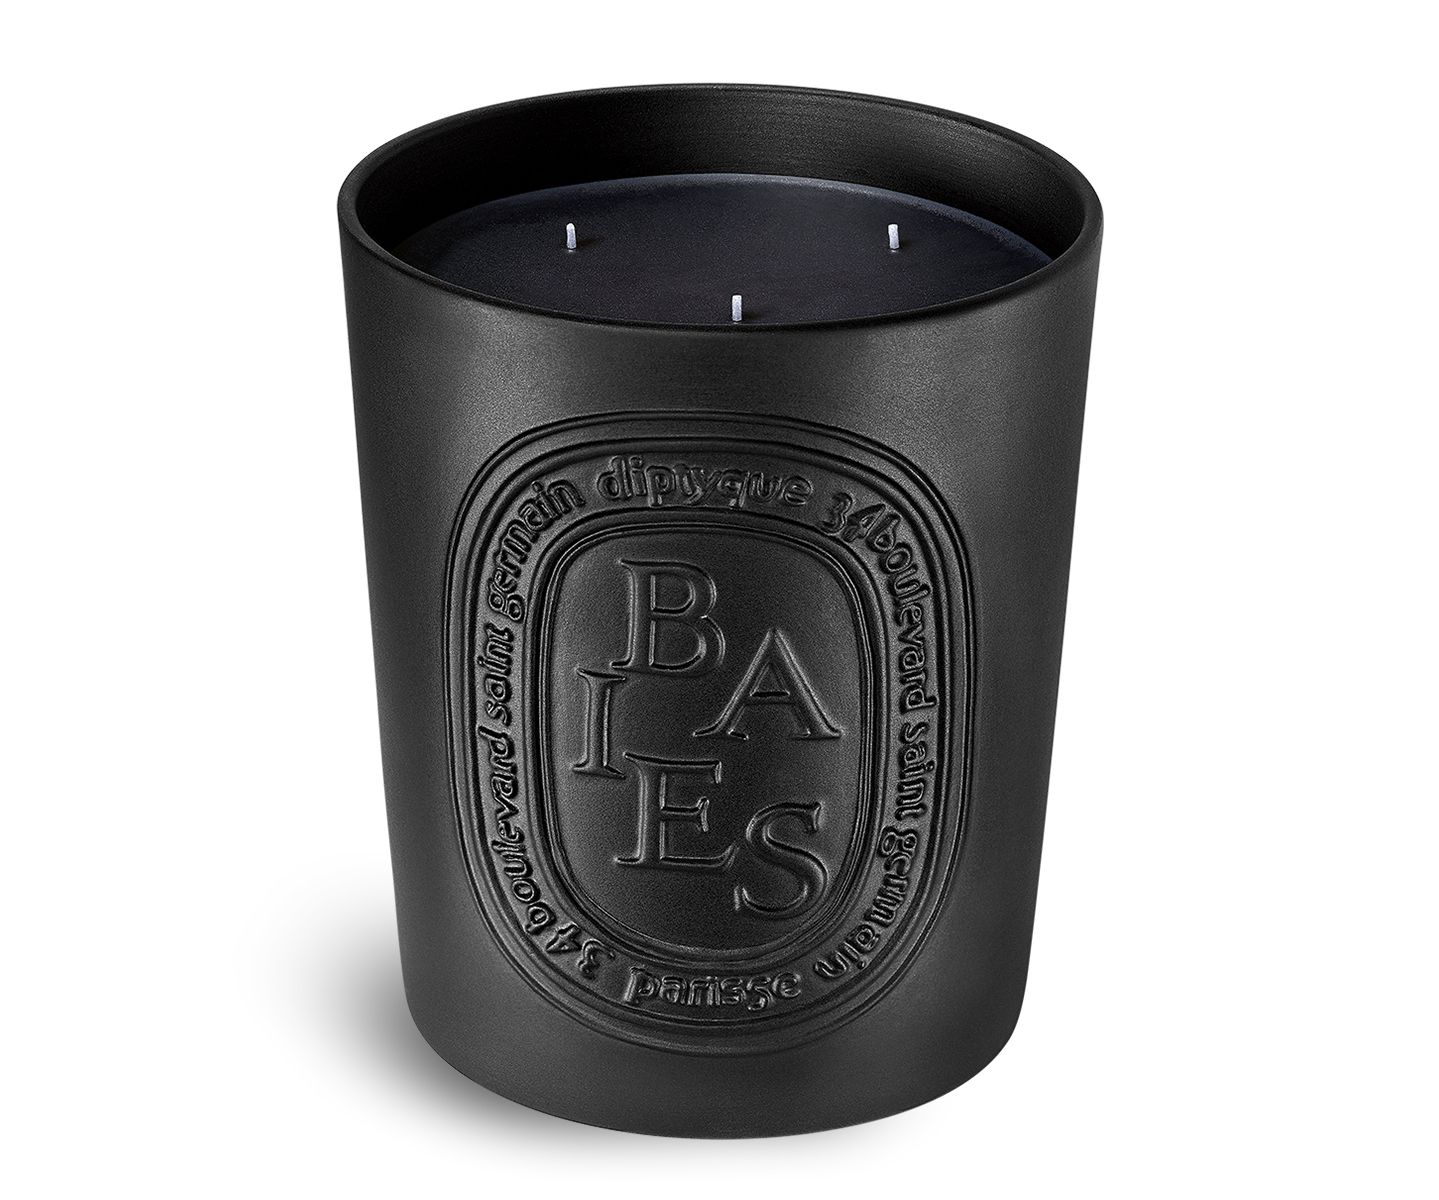 Baies / Berries candle 600g | diptyque (US)